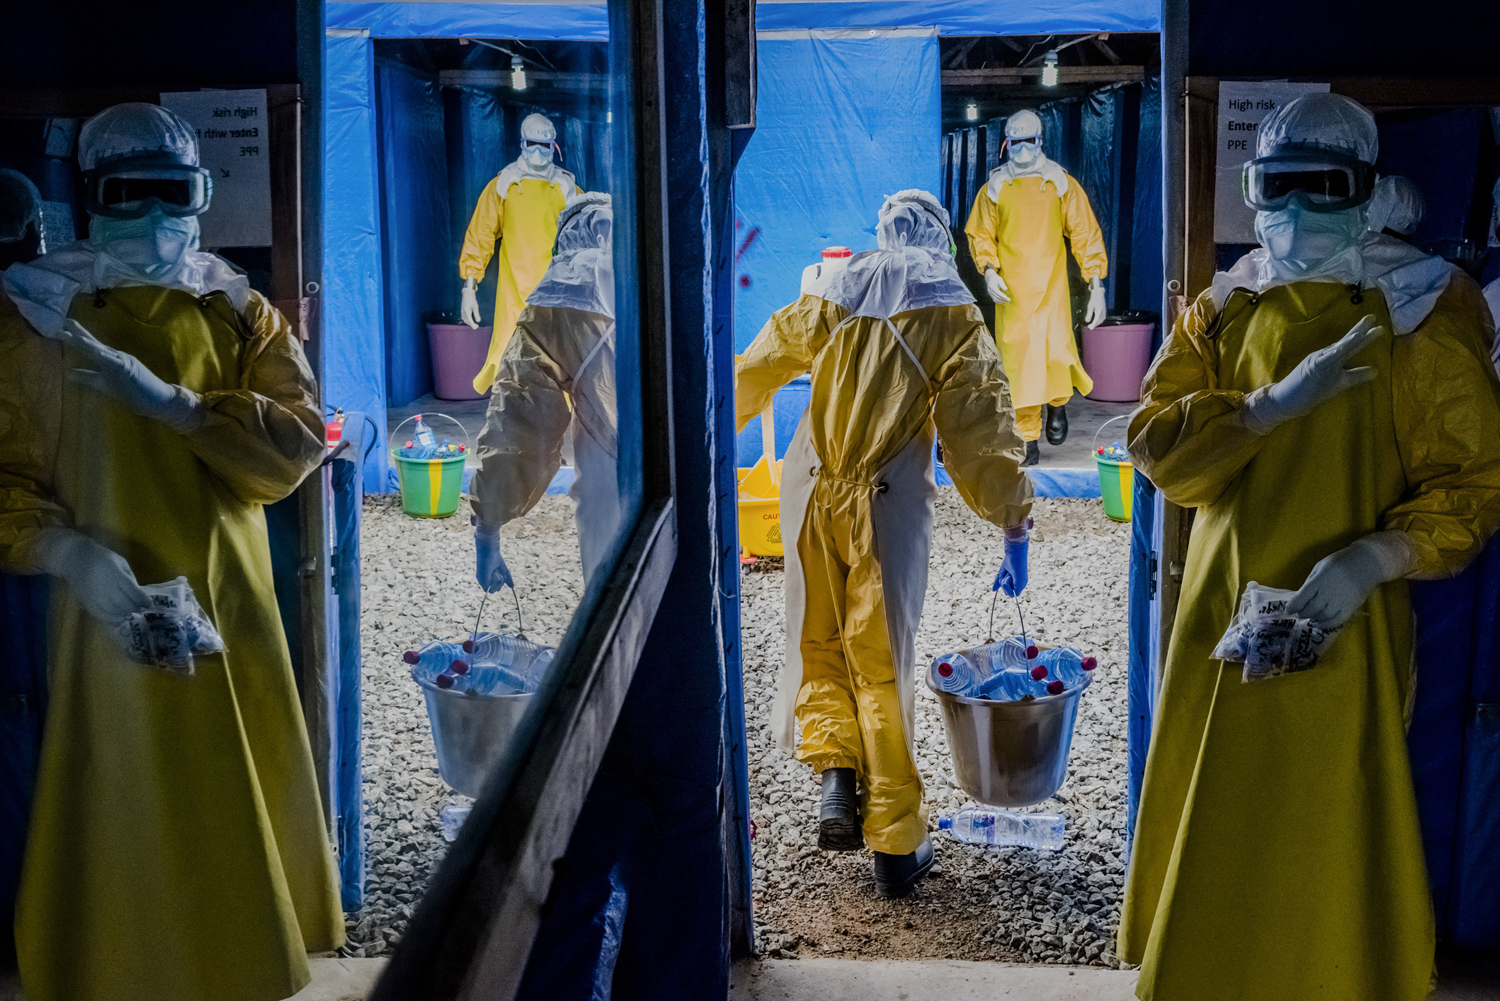 Health workers enter the high-risk zone as they make the morning rounds at the Bong County Ebola Treatment Unit in Sgt. Kollie Town near Gbarnga, Liberia, Oct. 6, 2014.